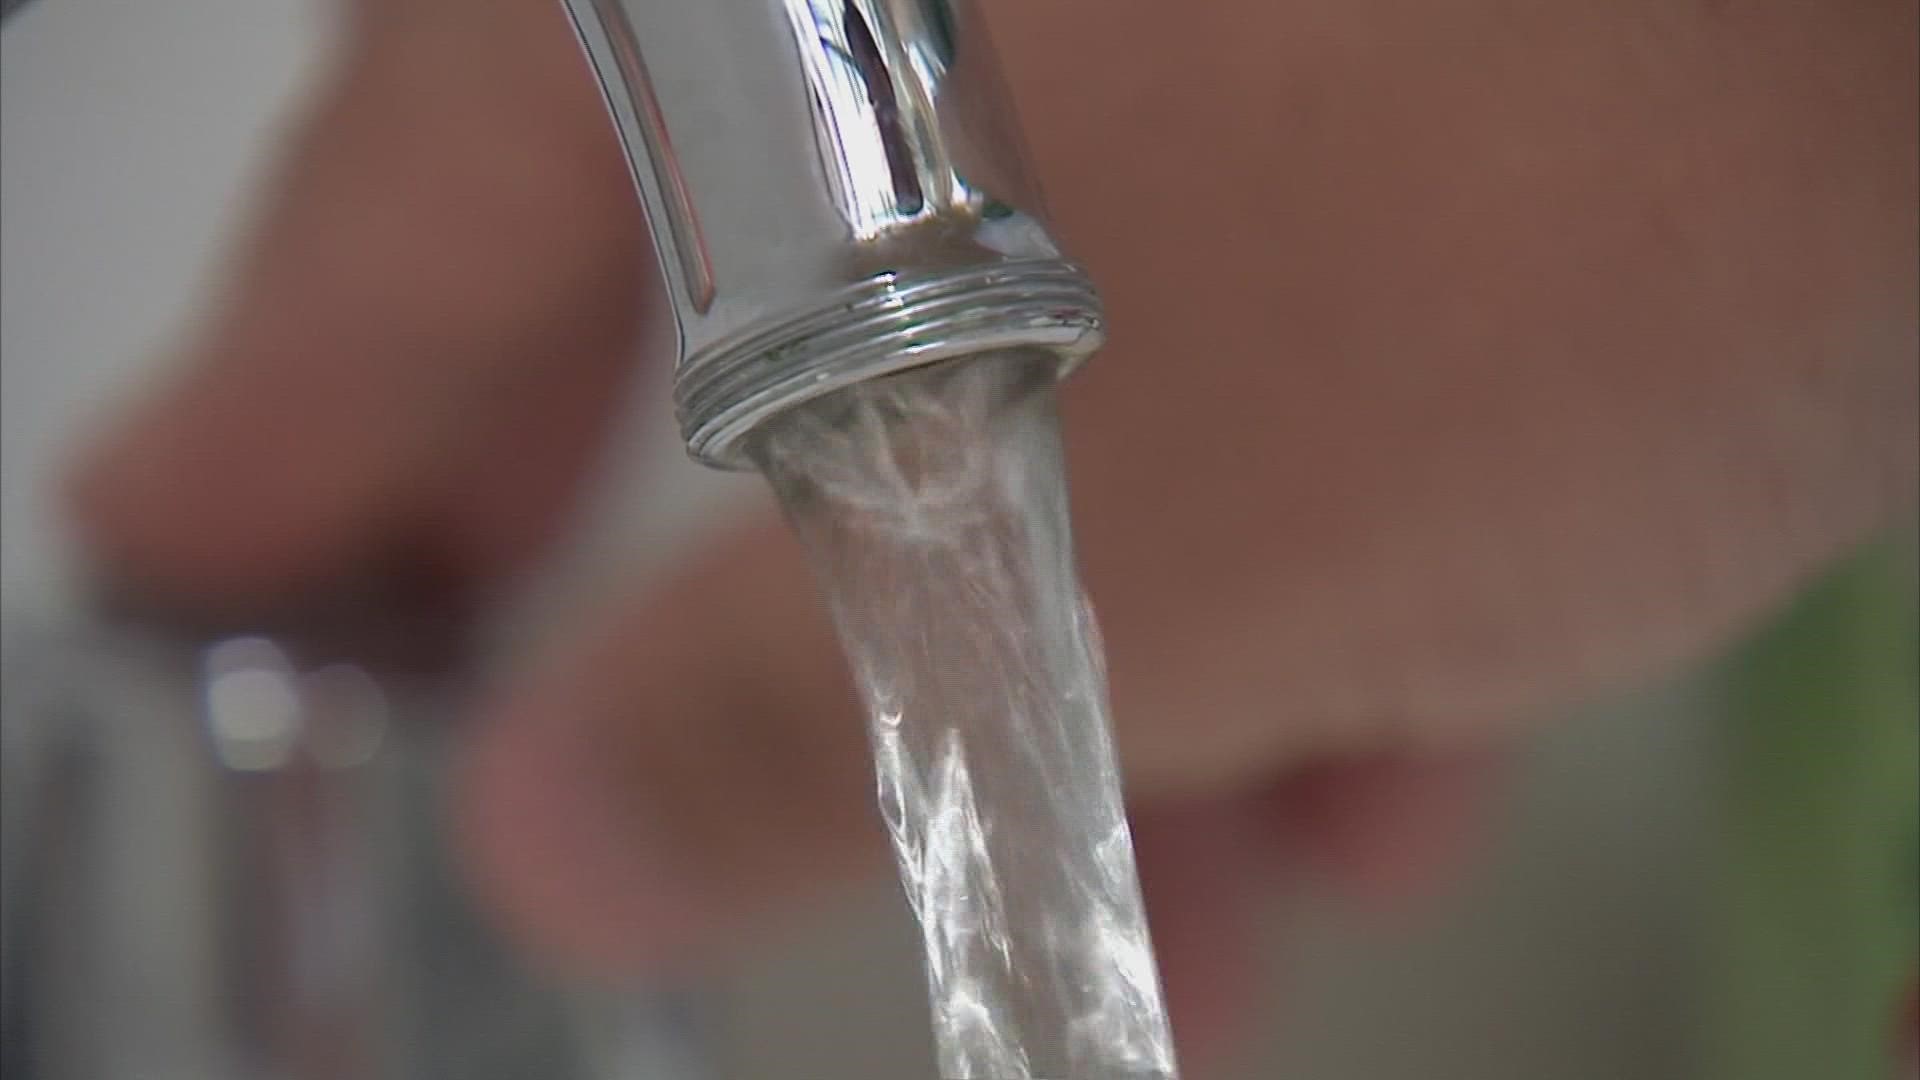 At least 45% of the nation’s tap water is estimated to have one or more types of PFAS, according to a study by the U.S. Geological Survey.